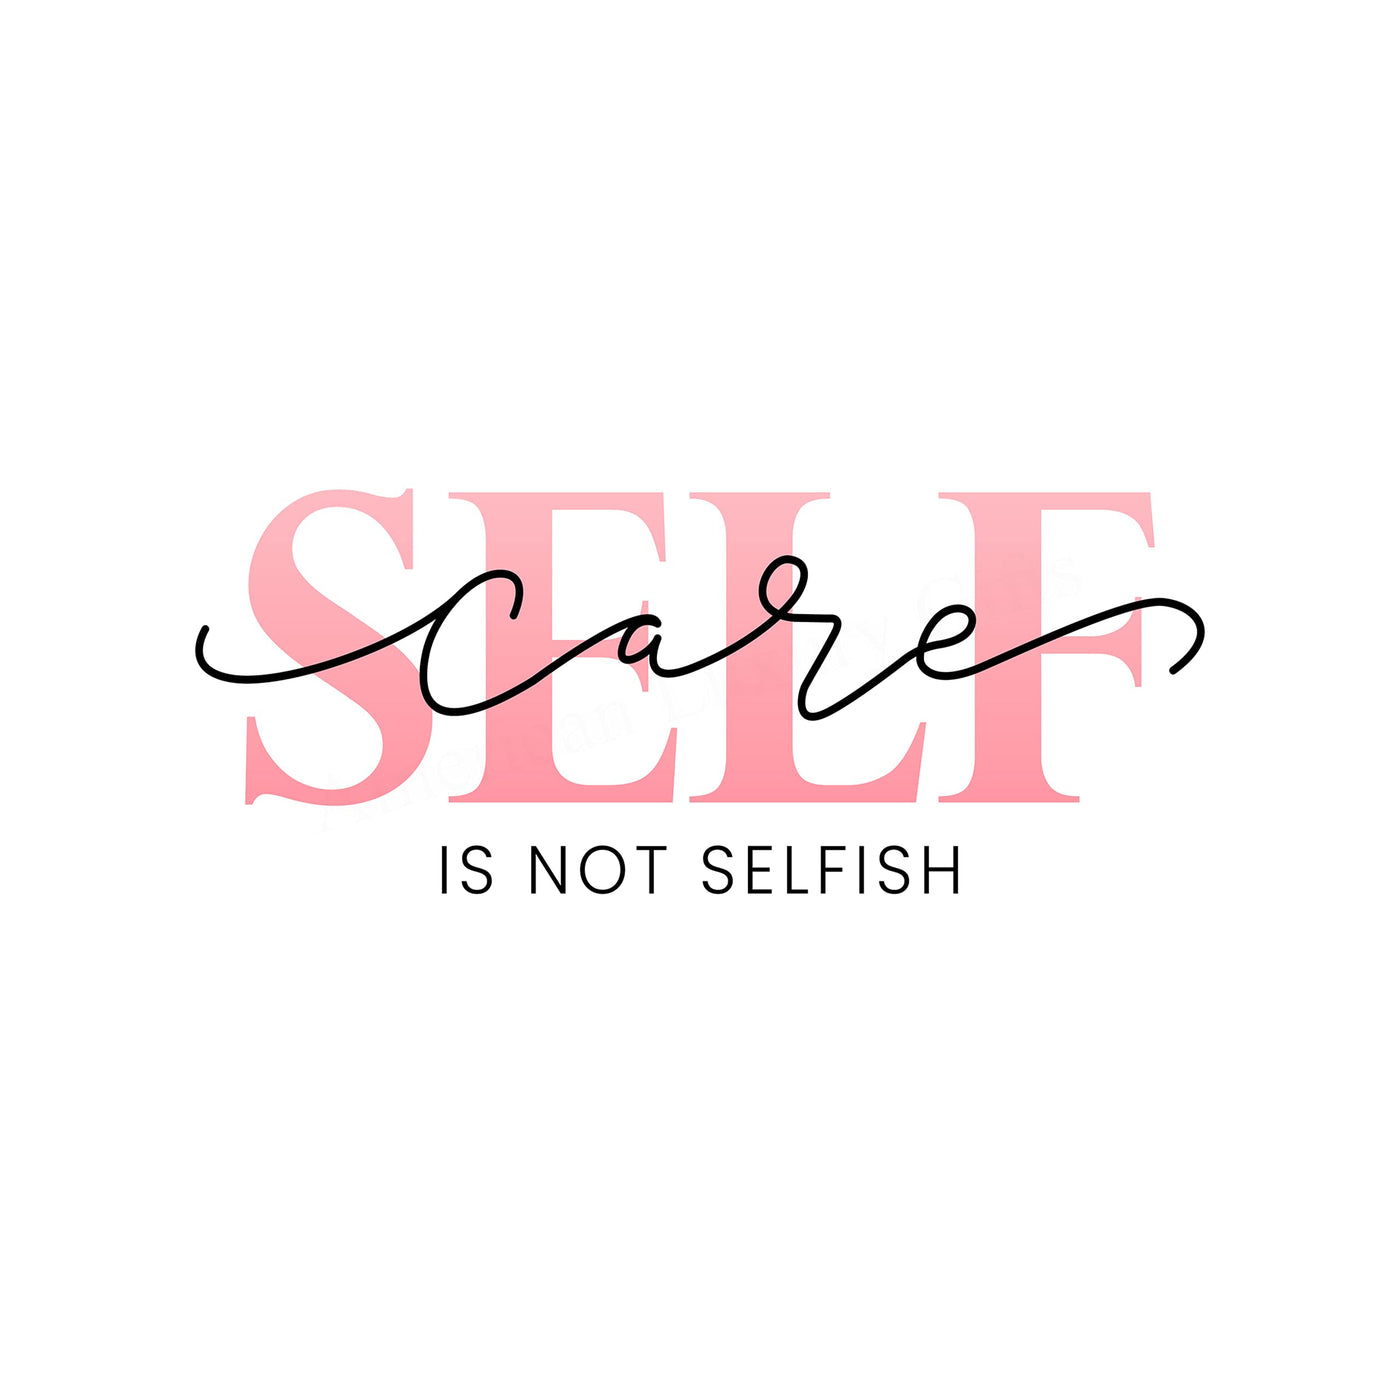 Self-Care -Is Not Selfish- Inspirational Quotes Wall Sign -10 x 8" Modern Typographic Art Print -Ready to Frame. Motivational Decor for Home-Office-Studio-School. Great Gift for Inspiration!